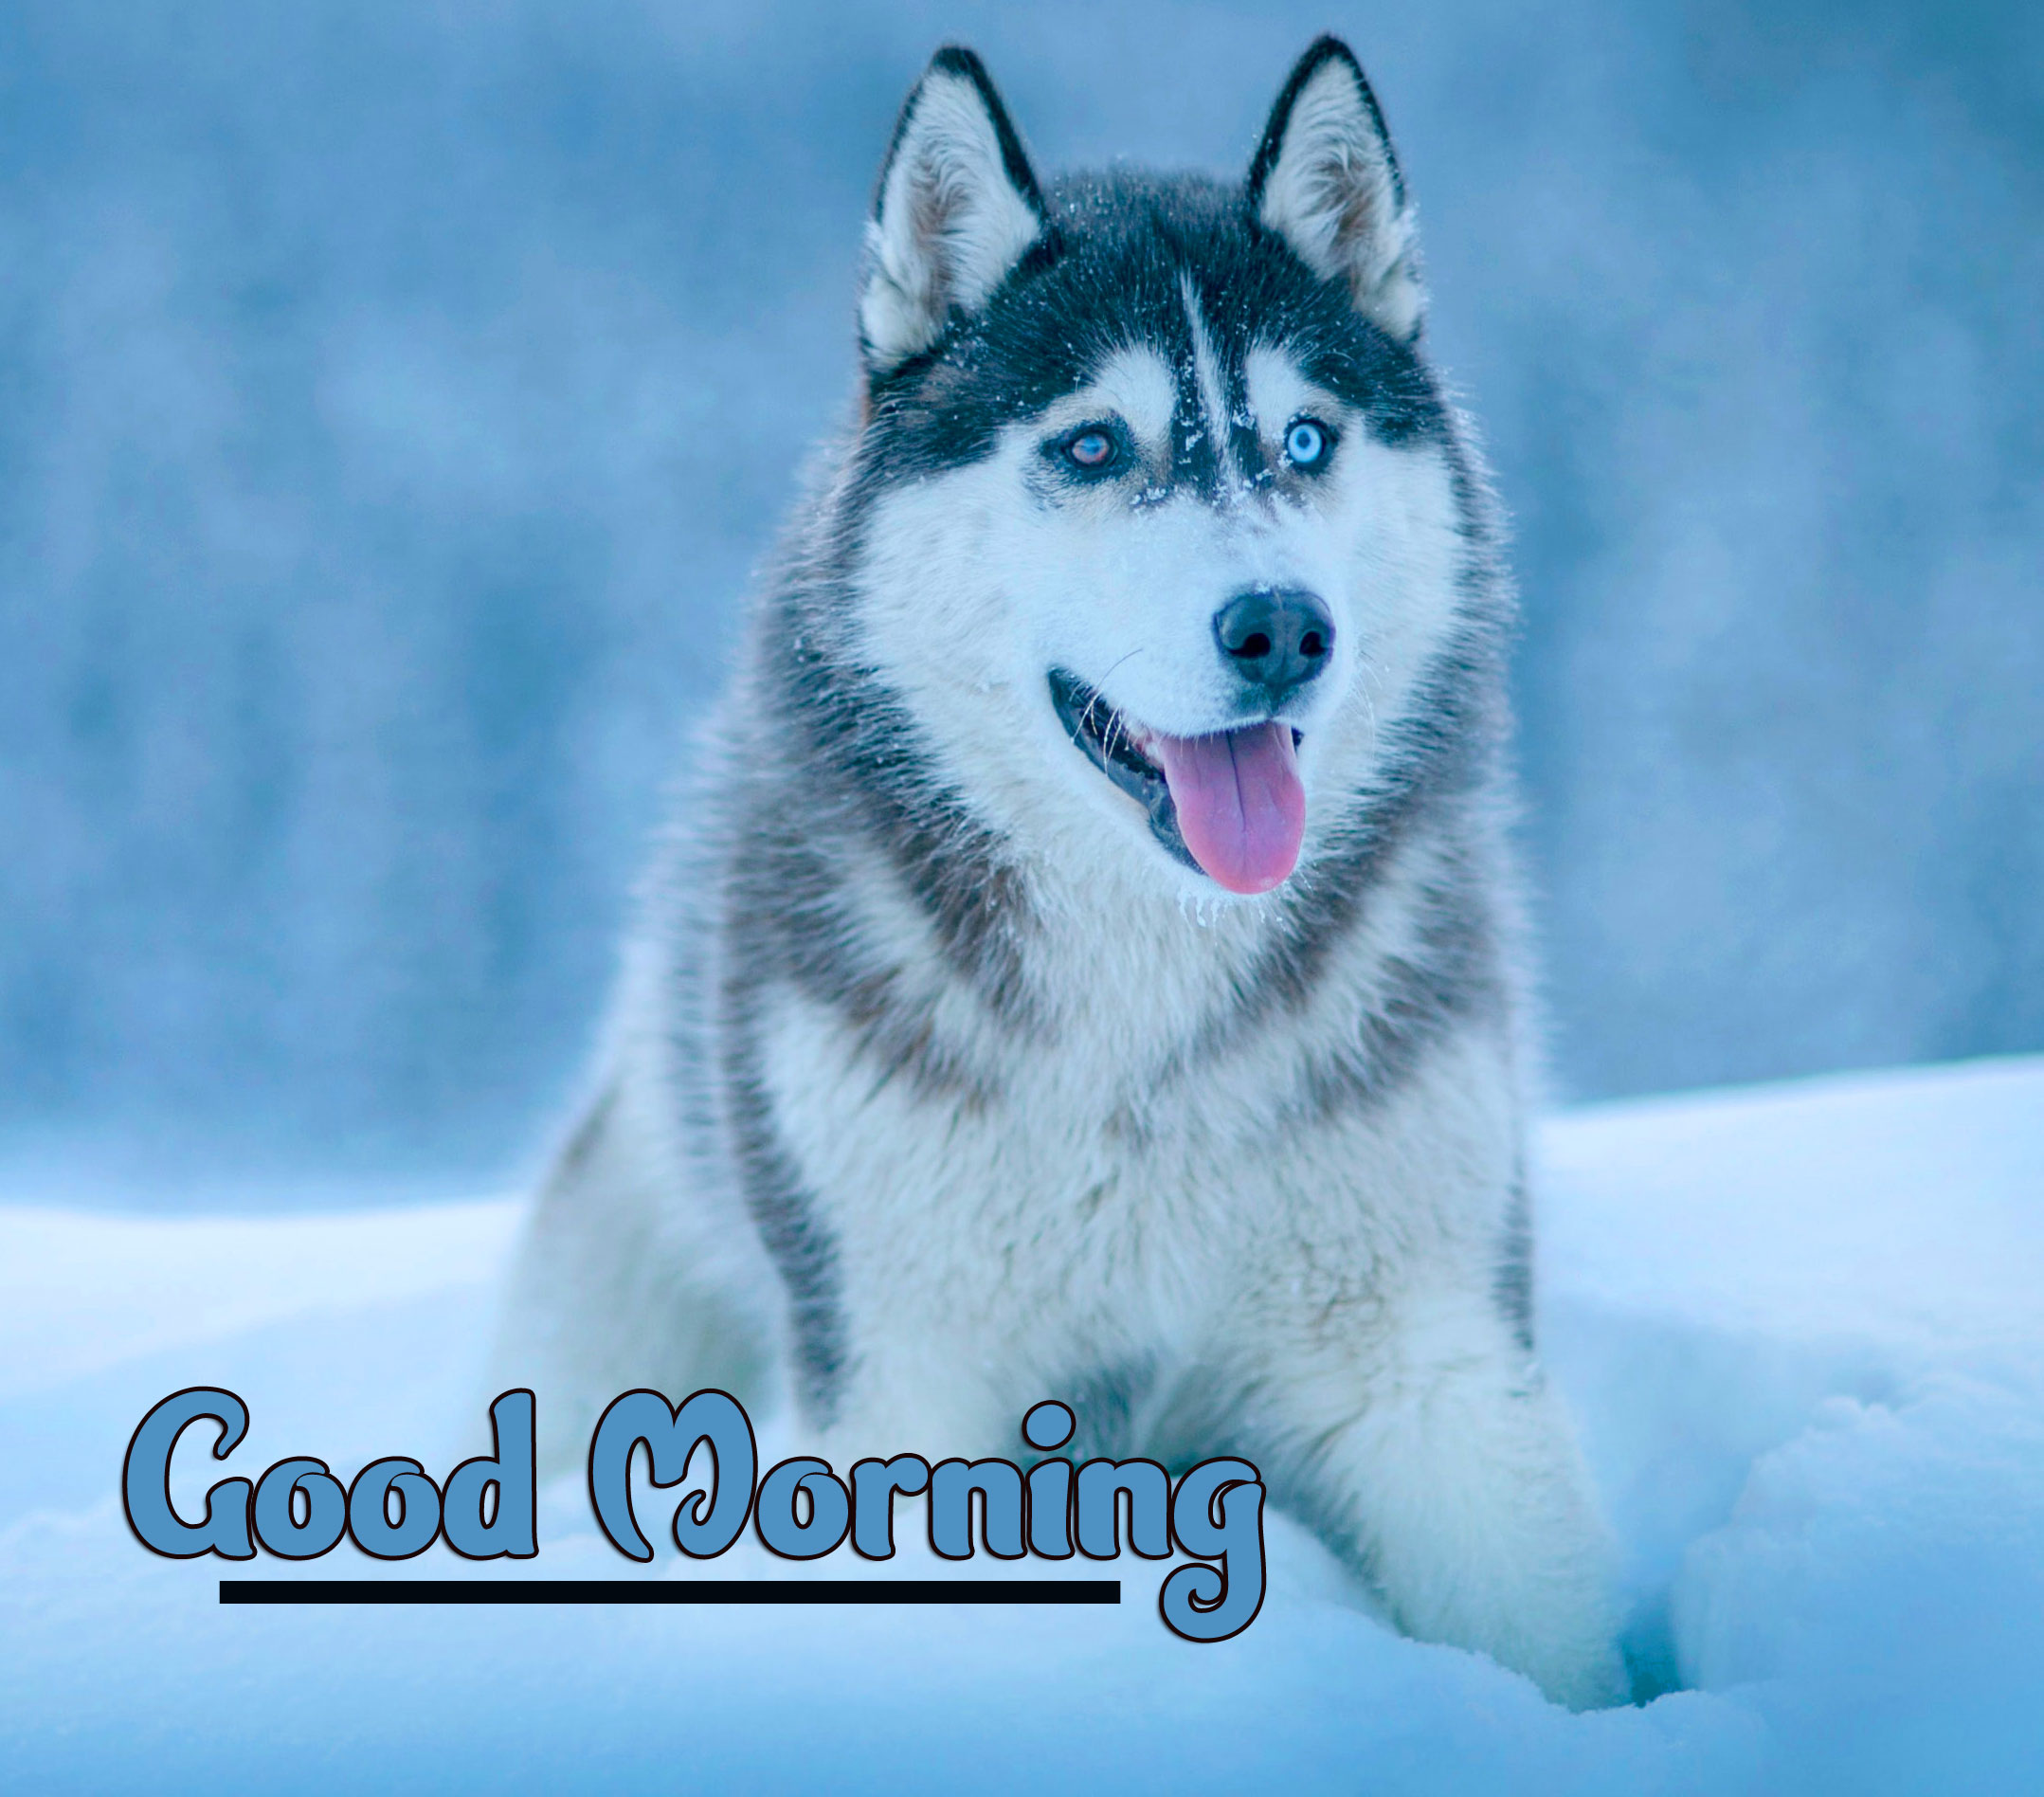 Animal Good morning Wishes Images Pics Wallpaper Download 